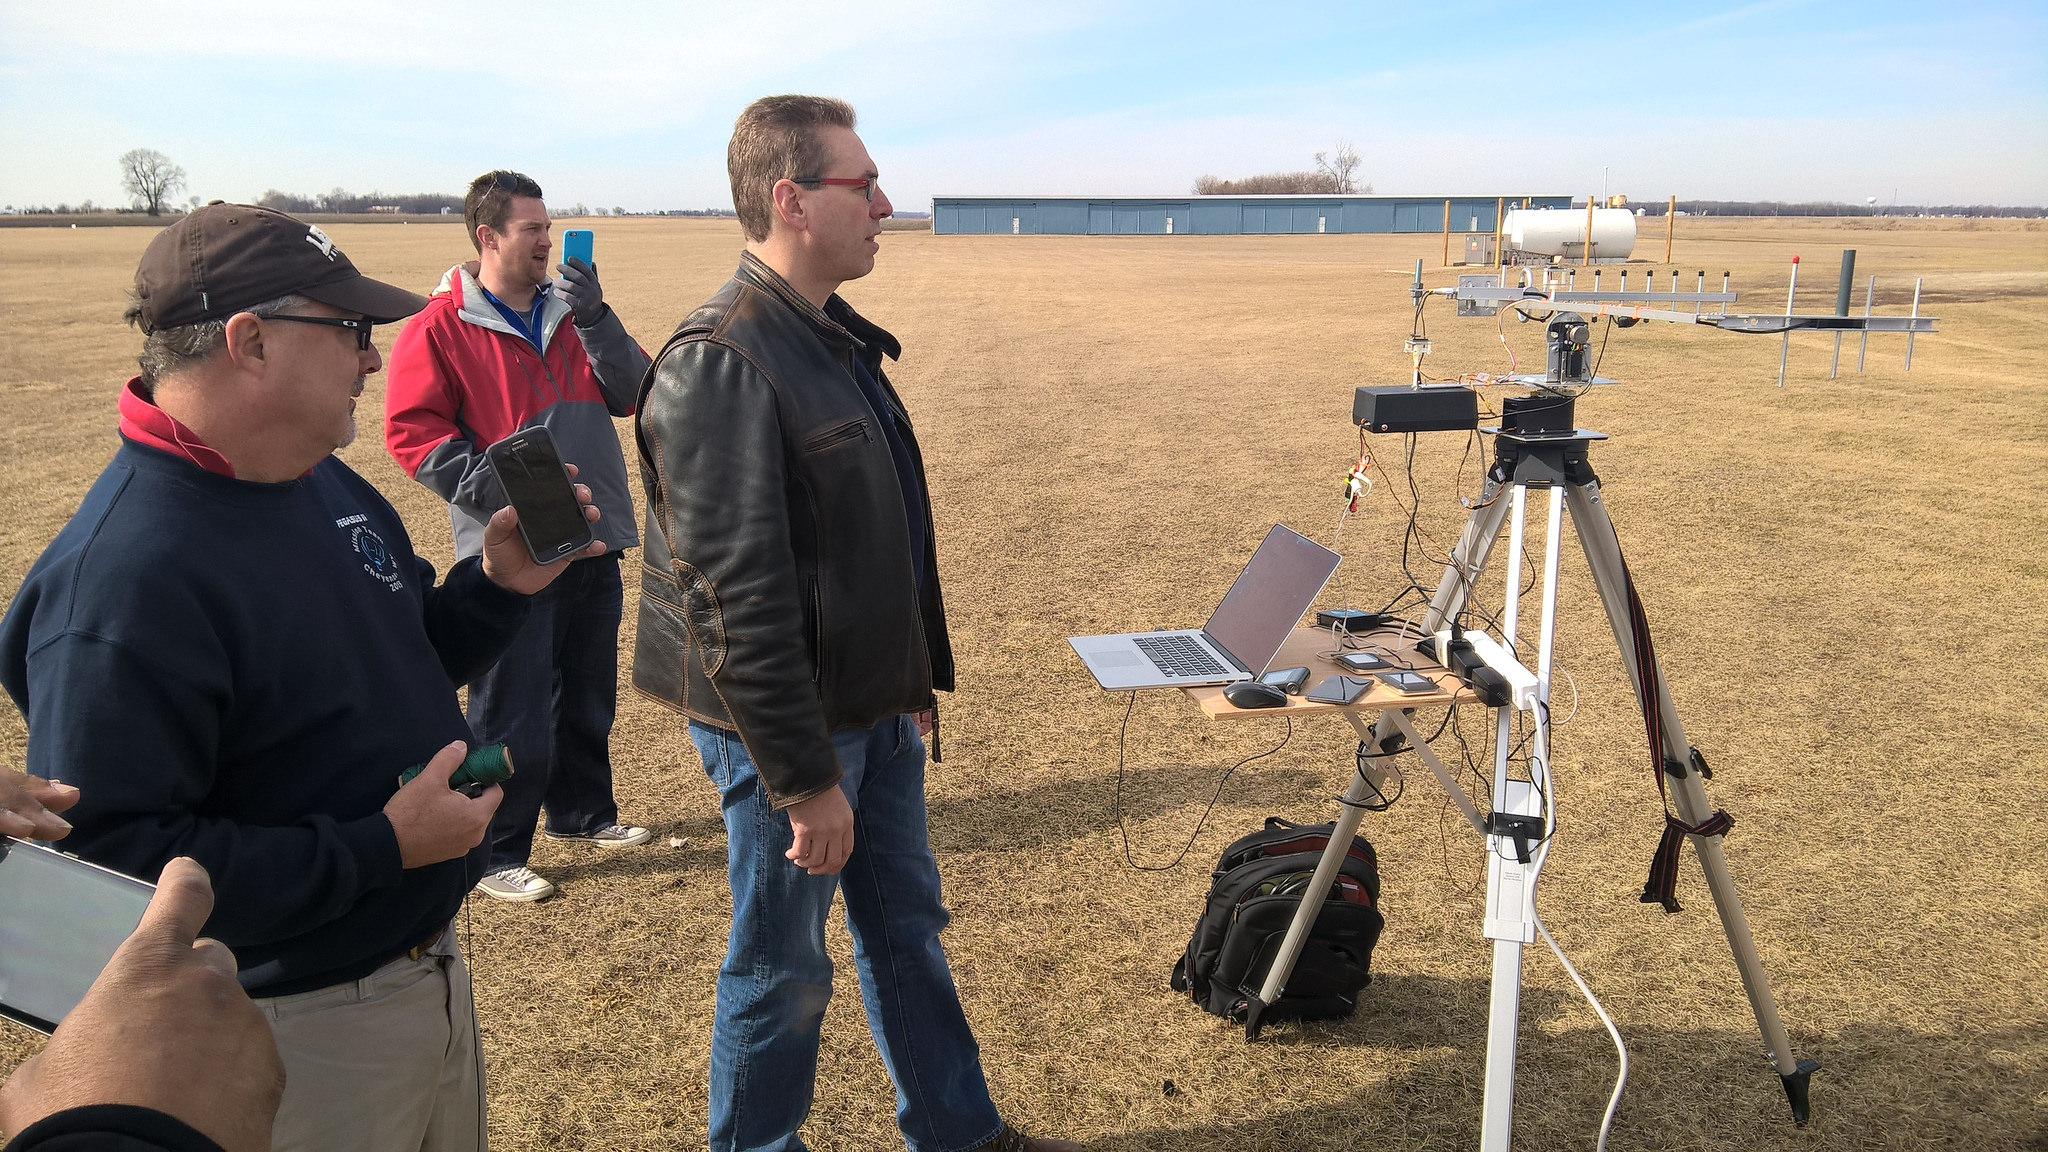 Pegasus II: Setting up the tracking antennas for data and video.